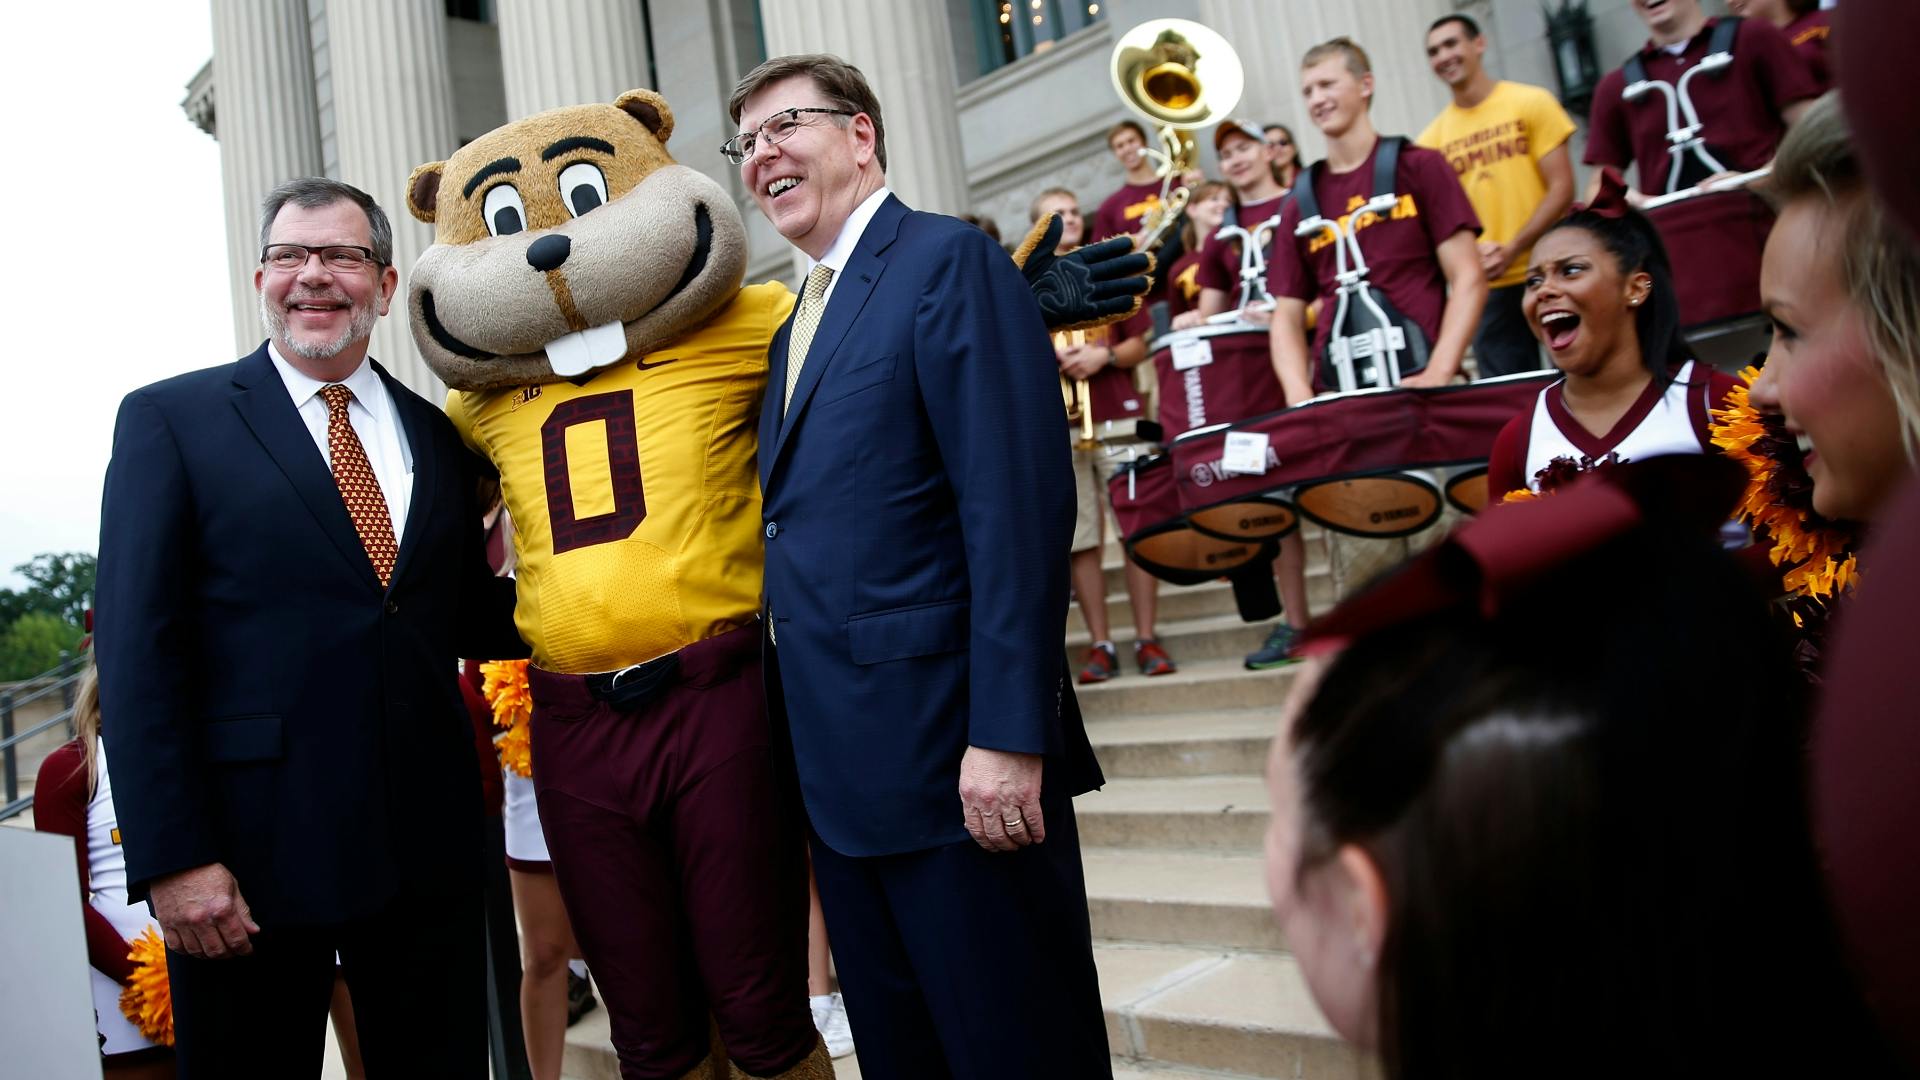 Jerry Kill talks about the big contribution by Land O'Lakes to the University of Minnesota.